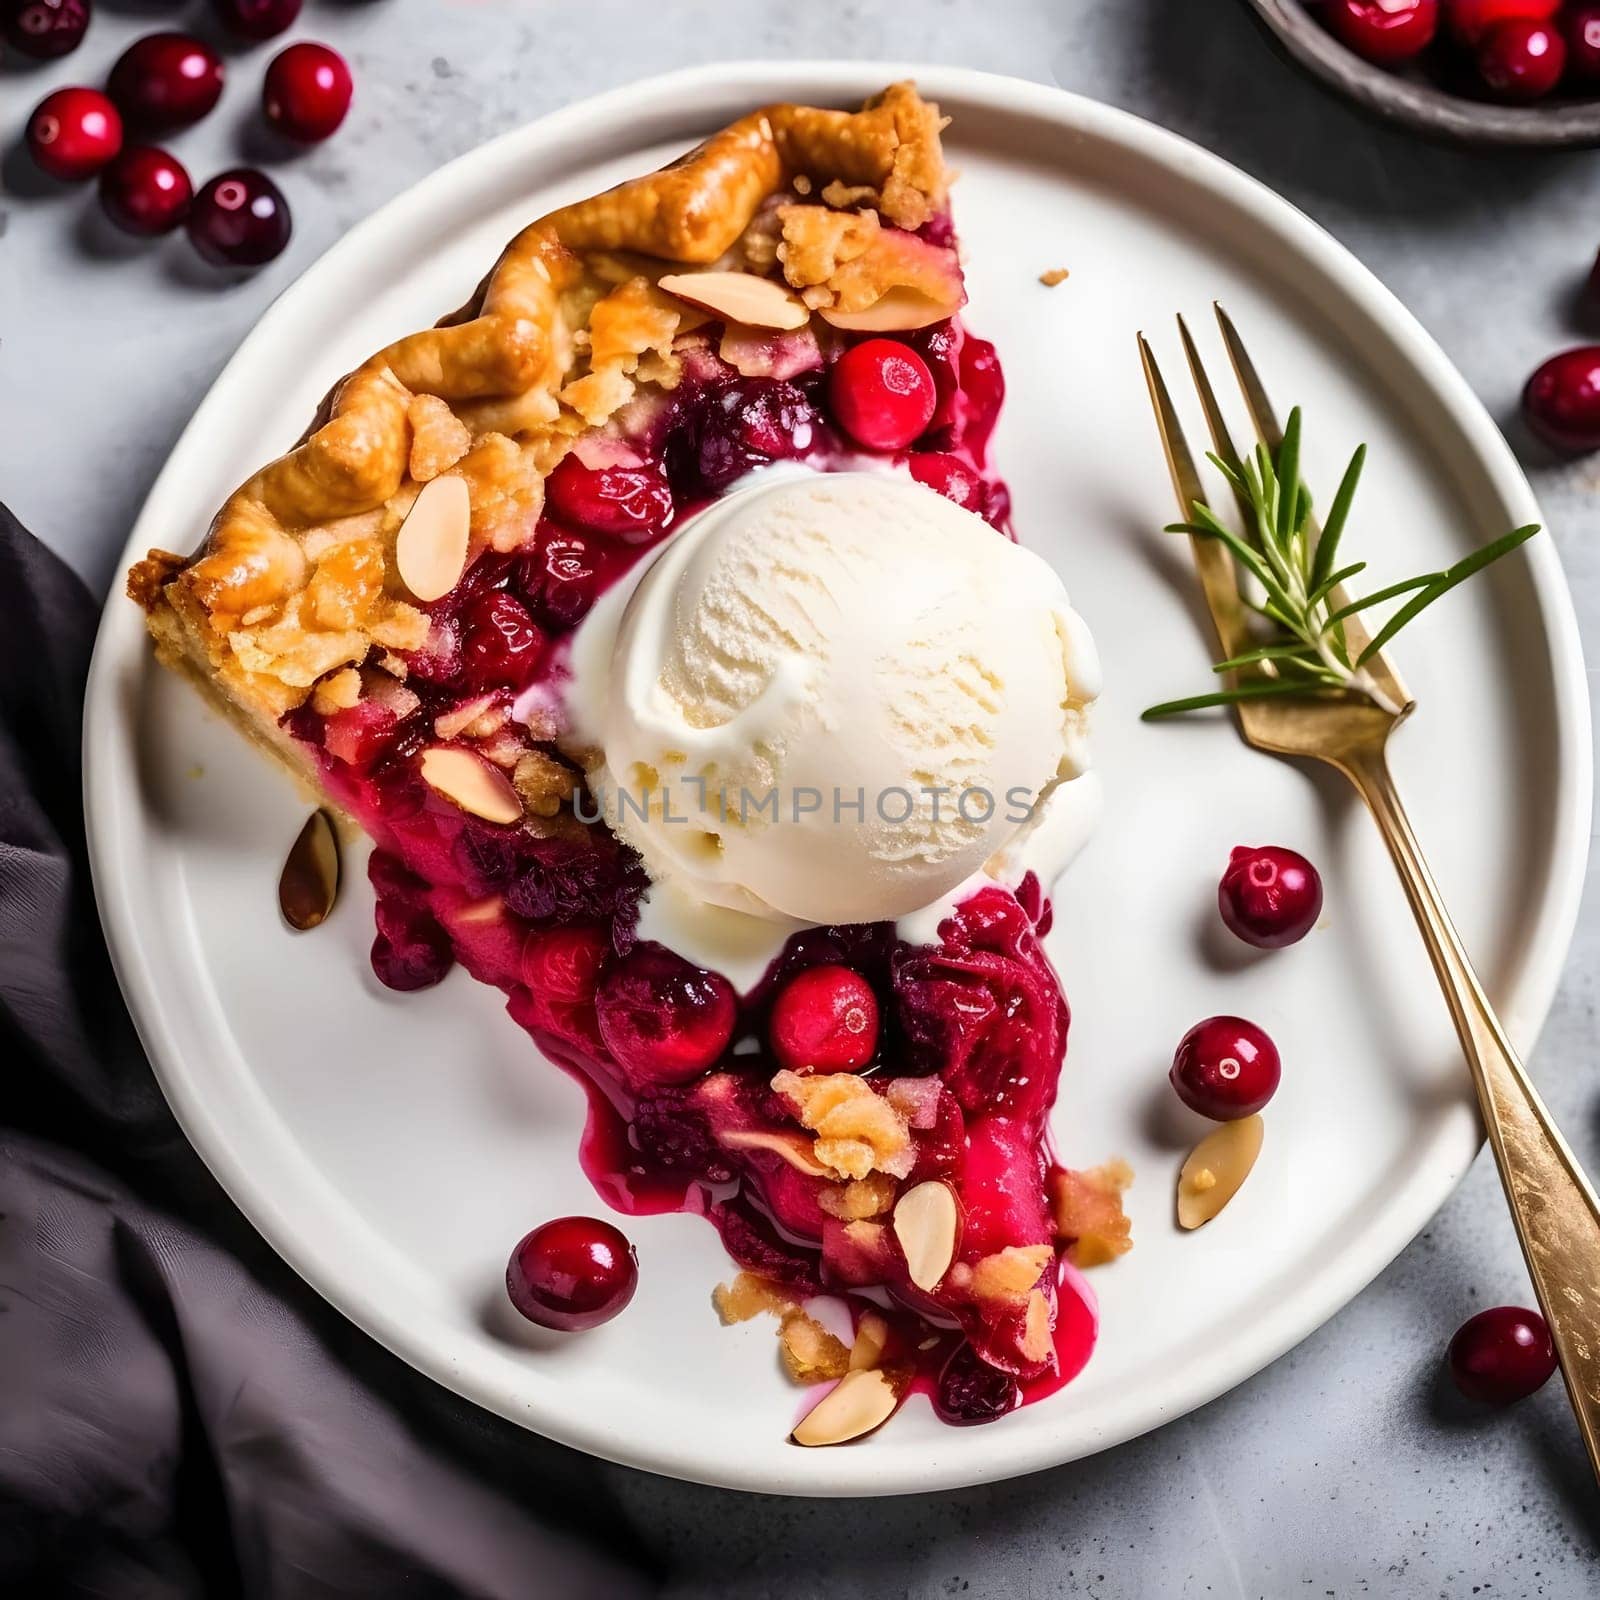 A slice of cherry and pumpkin pie with ice cream on a plate, top view. Pumpkin as a dish of thanksgiving for the harvest. An atmosphere of joy and celebration.